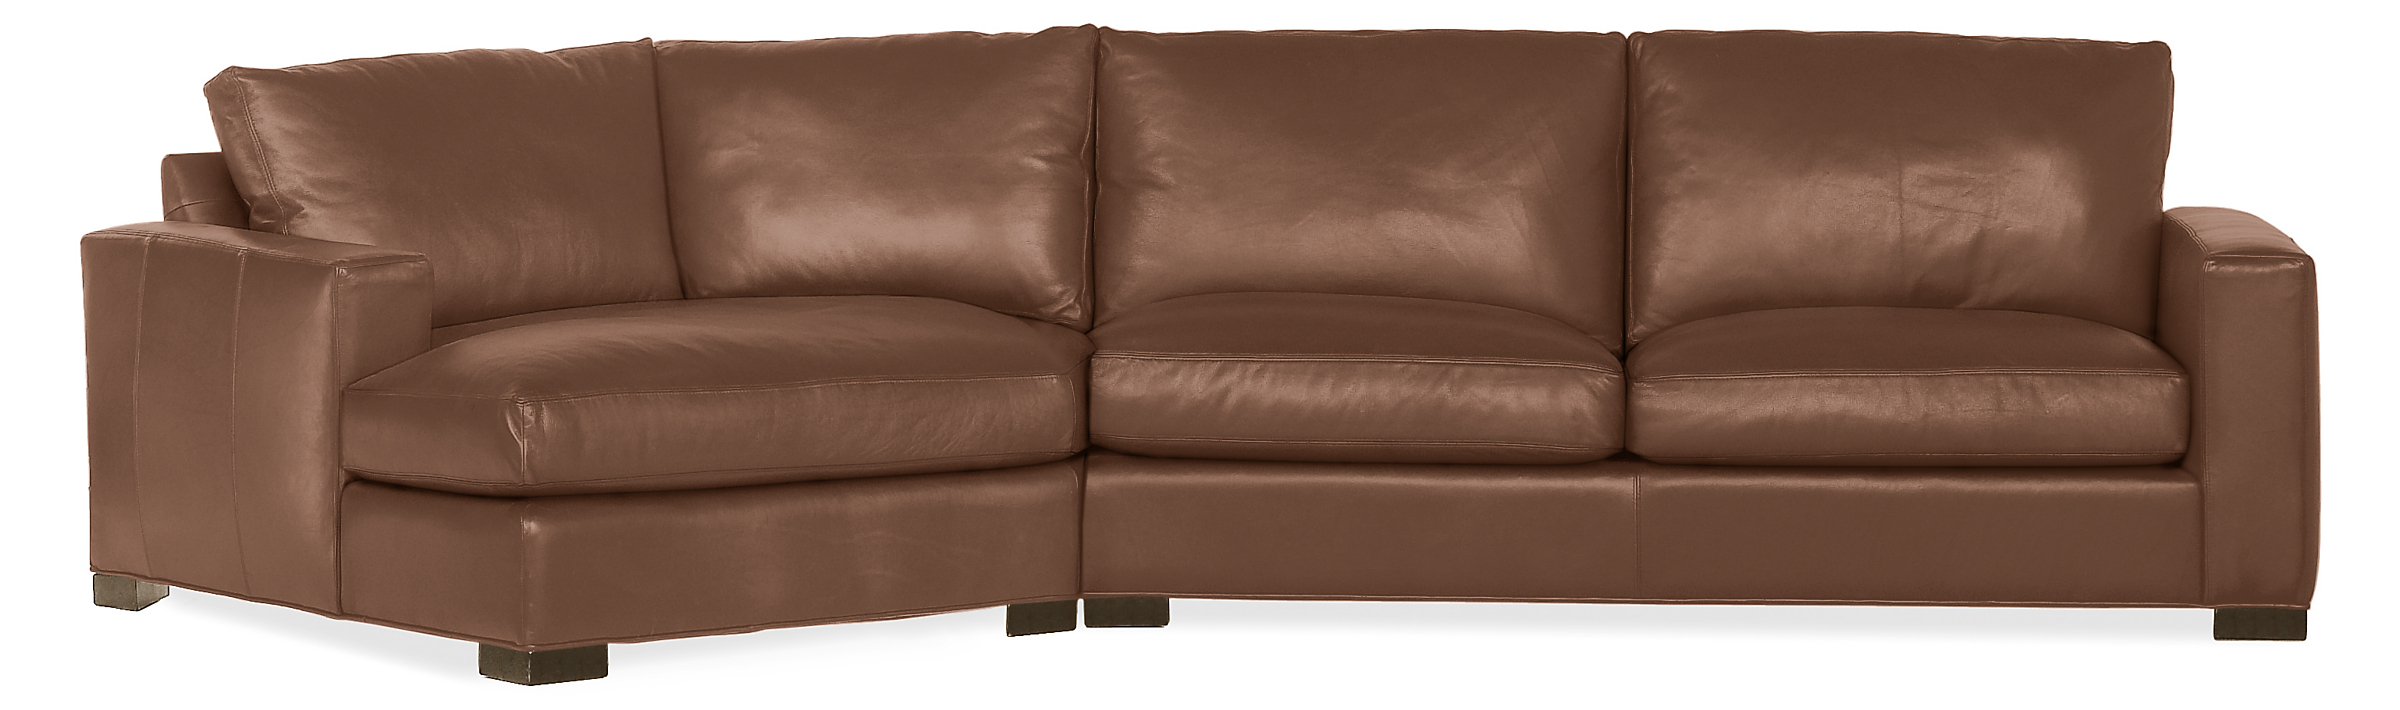 Metro 137" Sofa with Left-Arm Angled Chaise